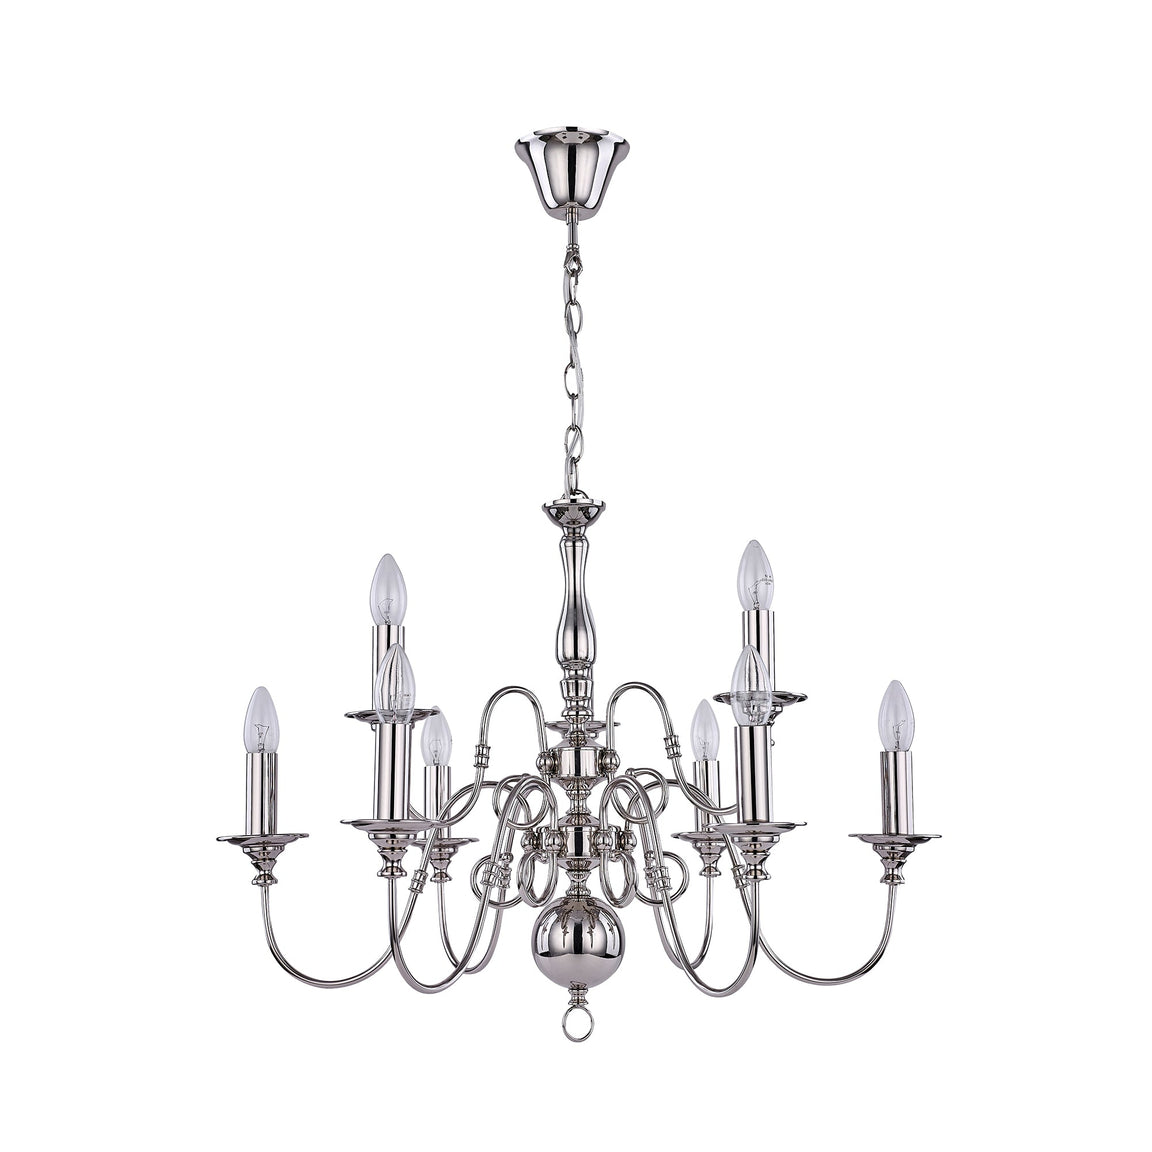 Ganeed 9 Light Satin Chrome Traditional Industrial Chandelier